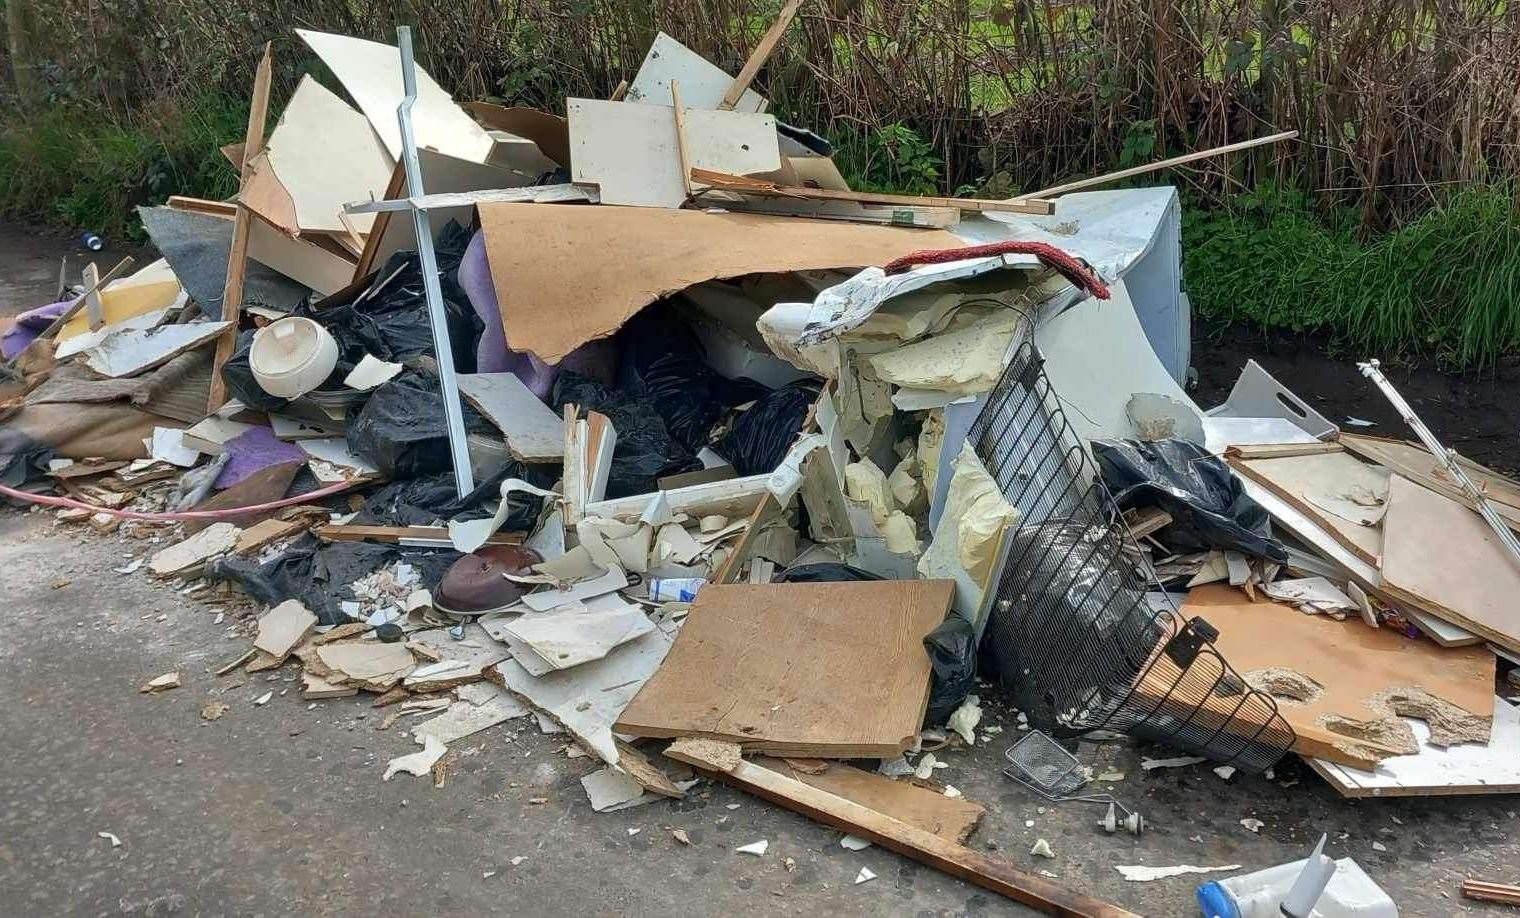 Fly-tipped waste has been found in New Cut, East Farleigh. Picture: Martin Deacon